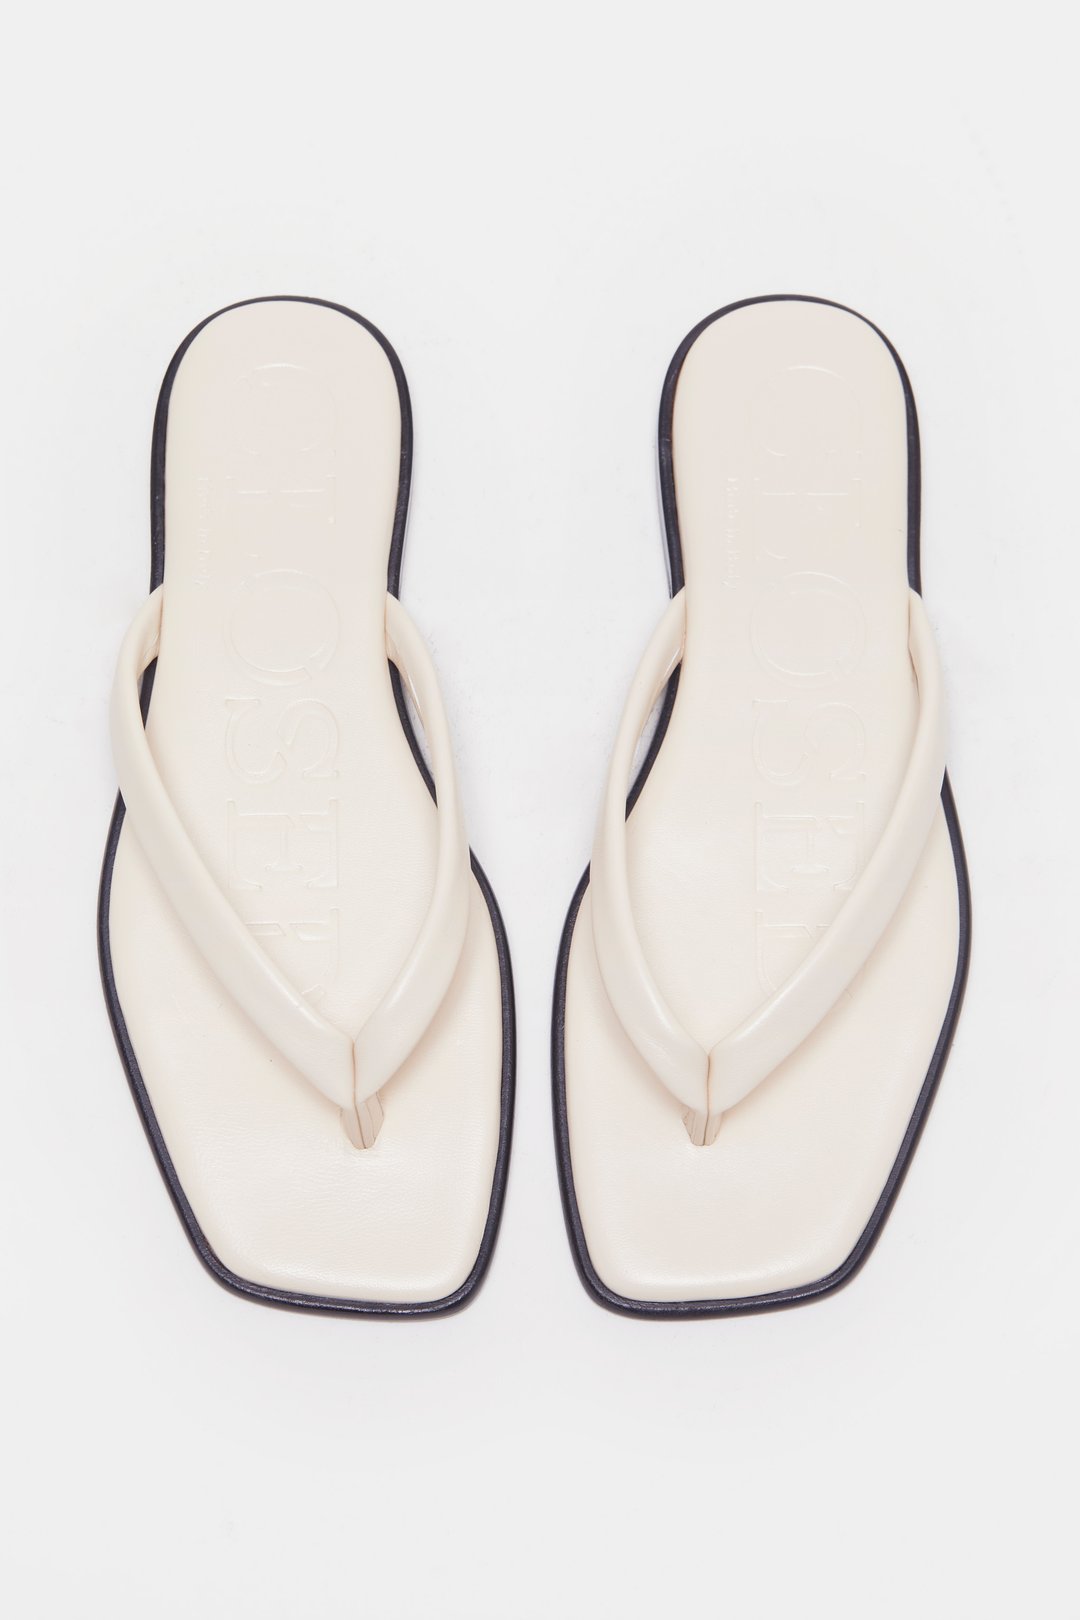 LEATHER SANDALS | CLOSED